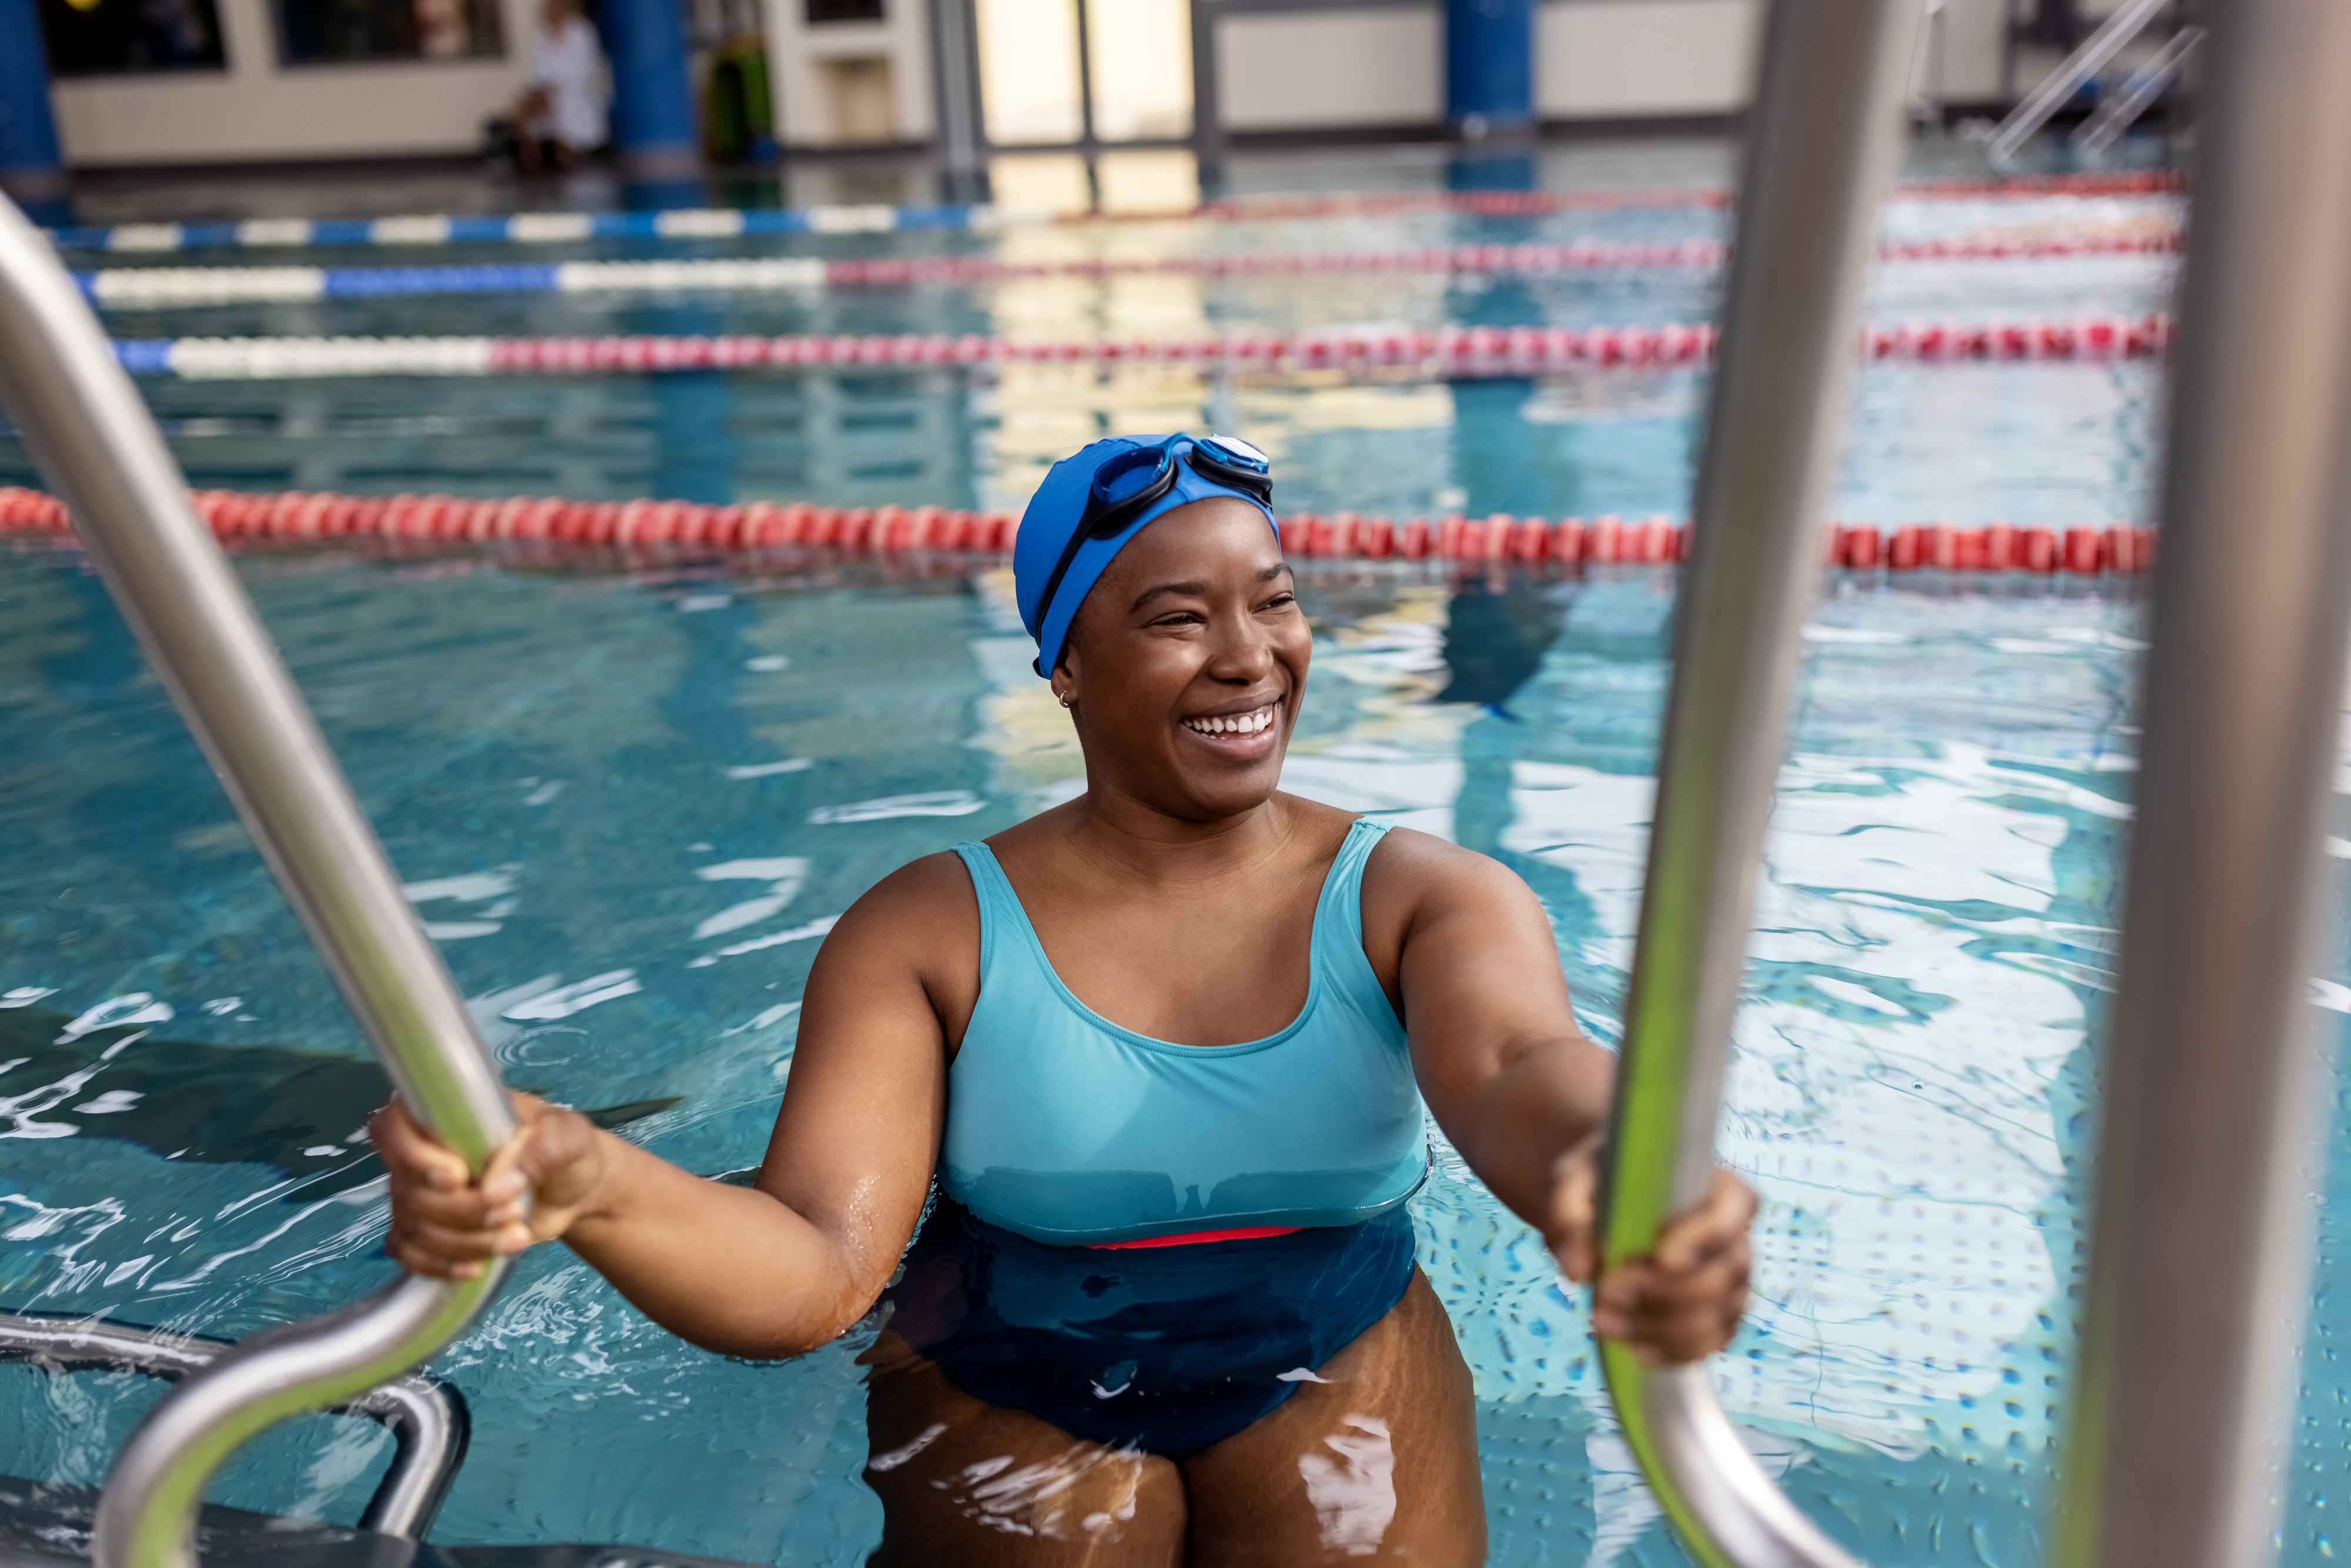 Woman in a swimsuit with a swim cap and goggles, smiling, holding onto a pool ladder